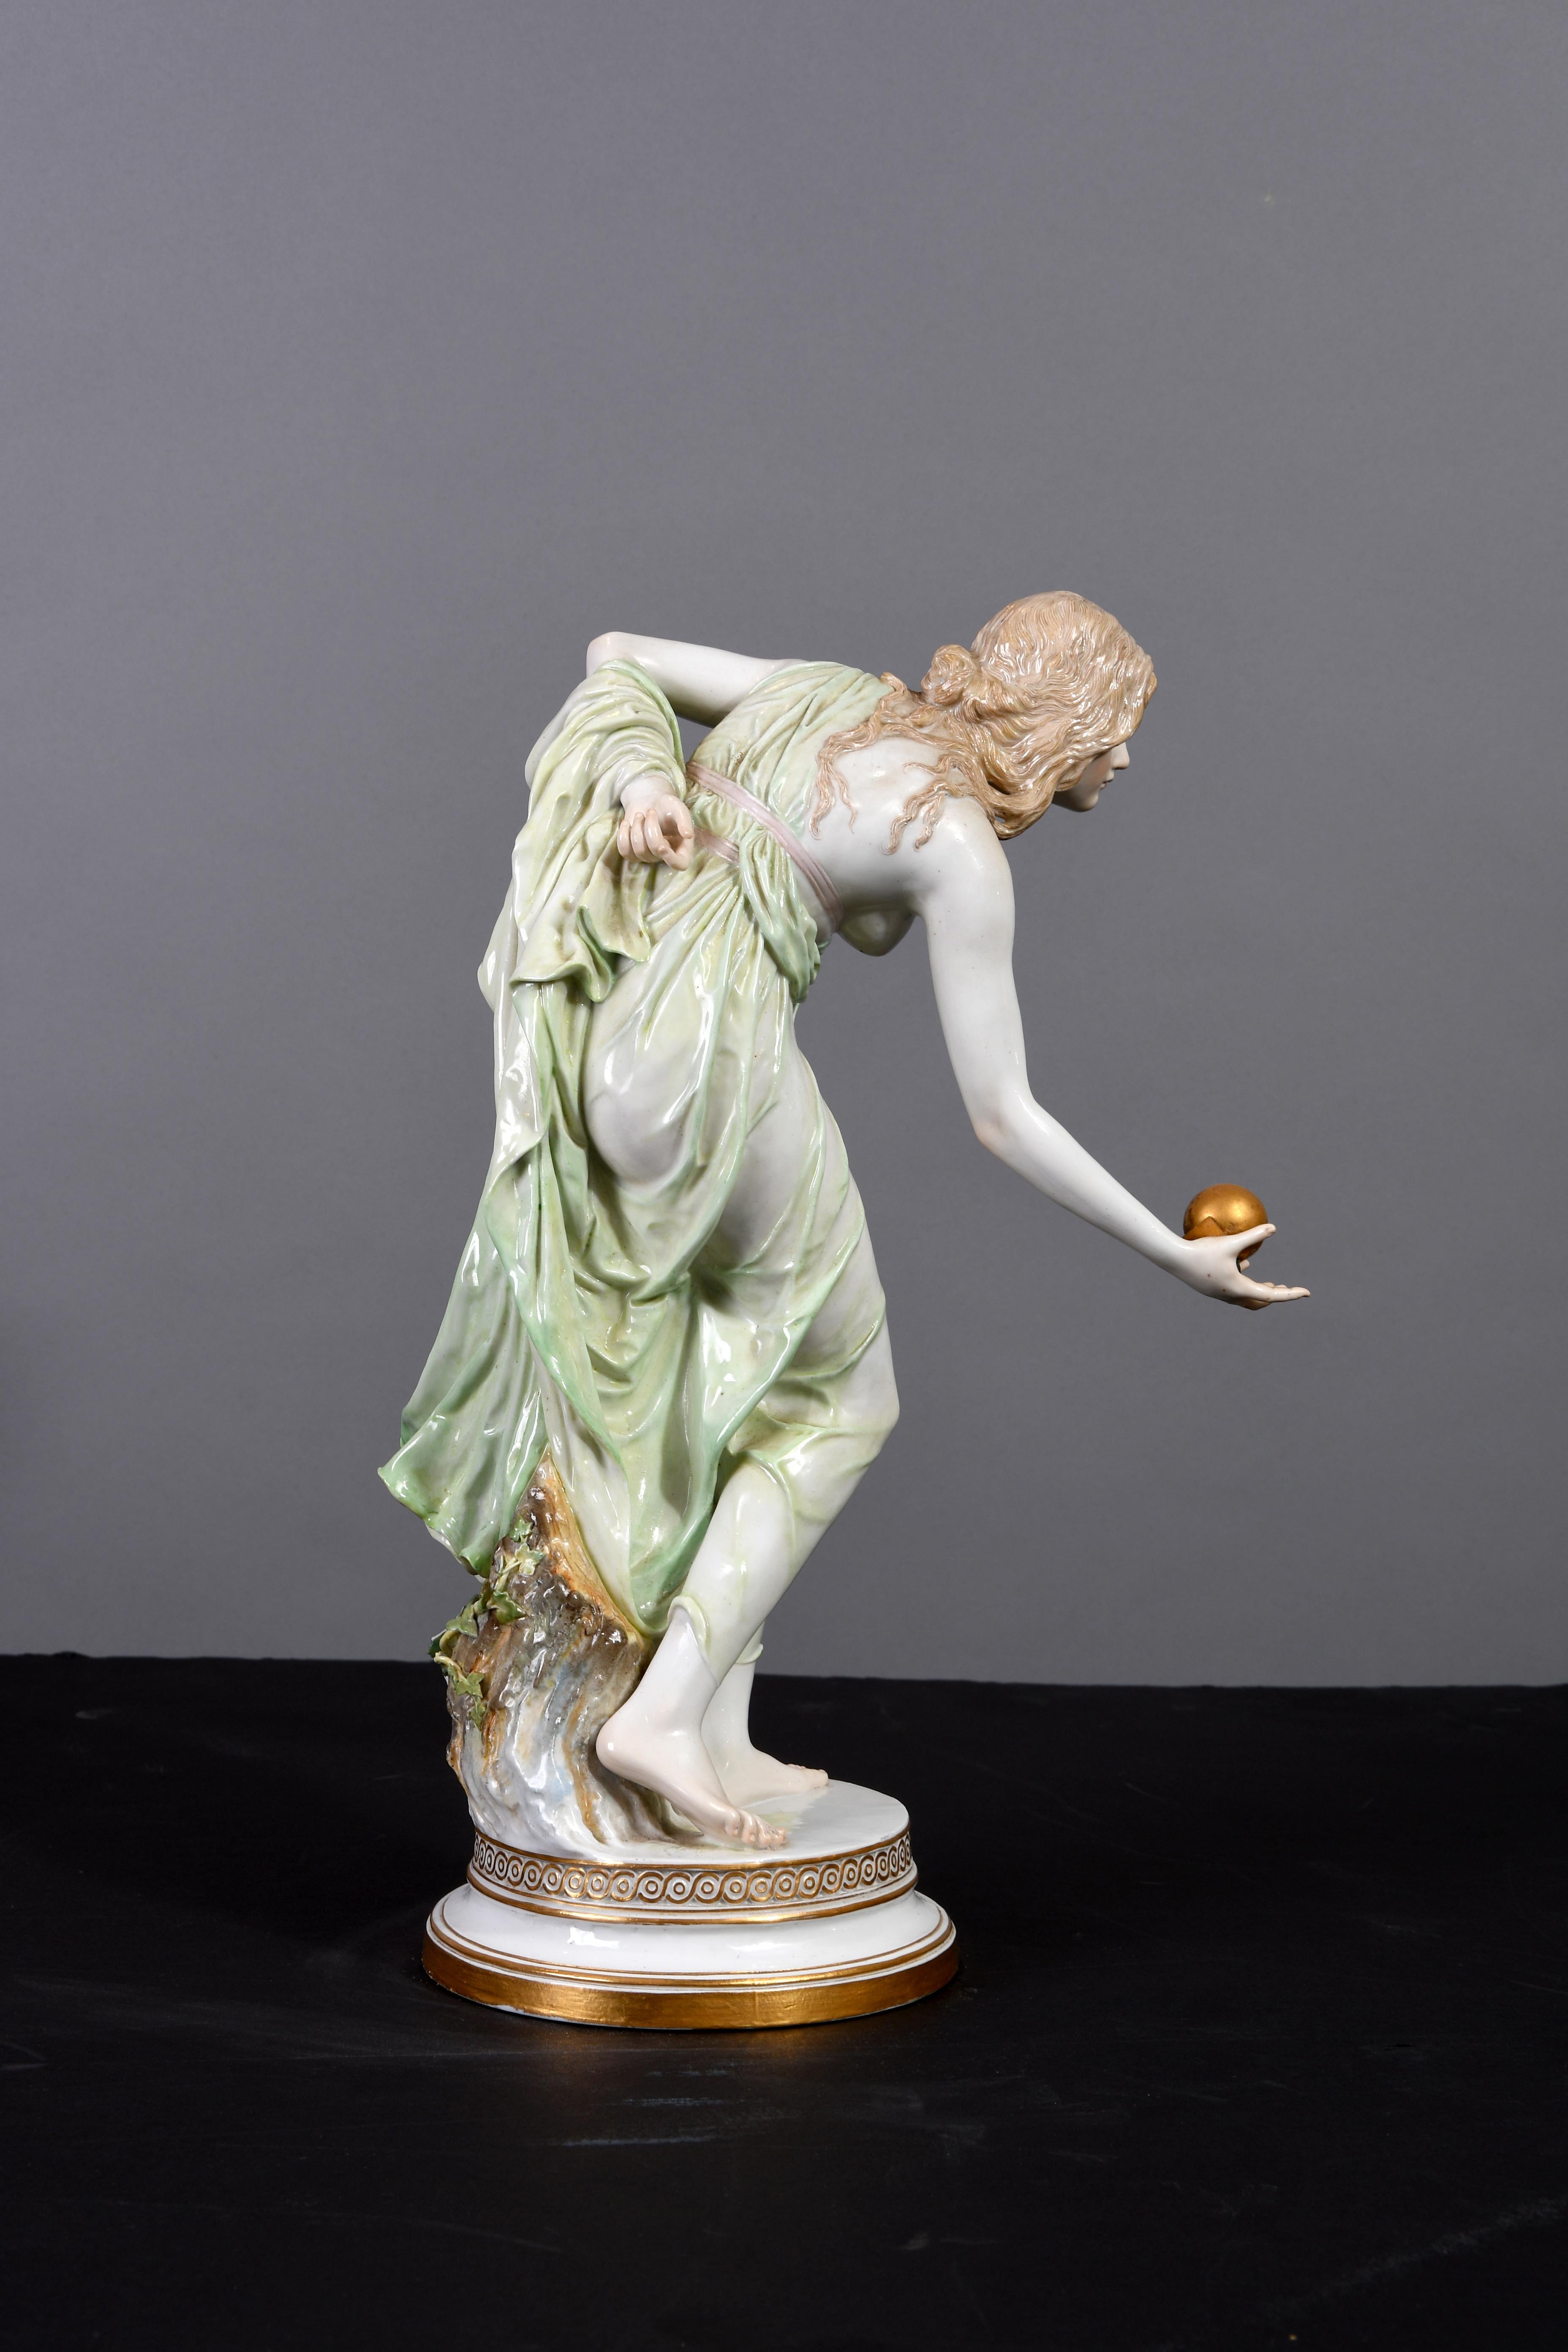 A nymph woman, dressed with a shear light green robe, ready to throw a ball. The porcelain is marked with the Meissen hallmark blue crossed swords below the round base. The ball and the base are painted in gold while the nymph dress is light green.